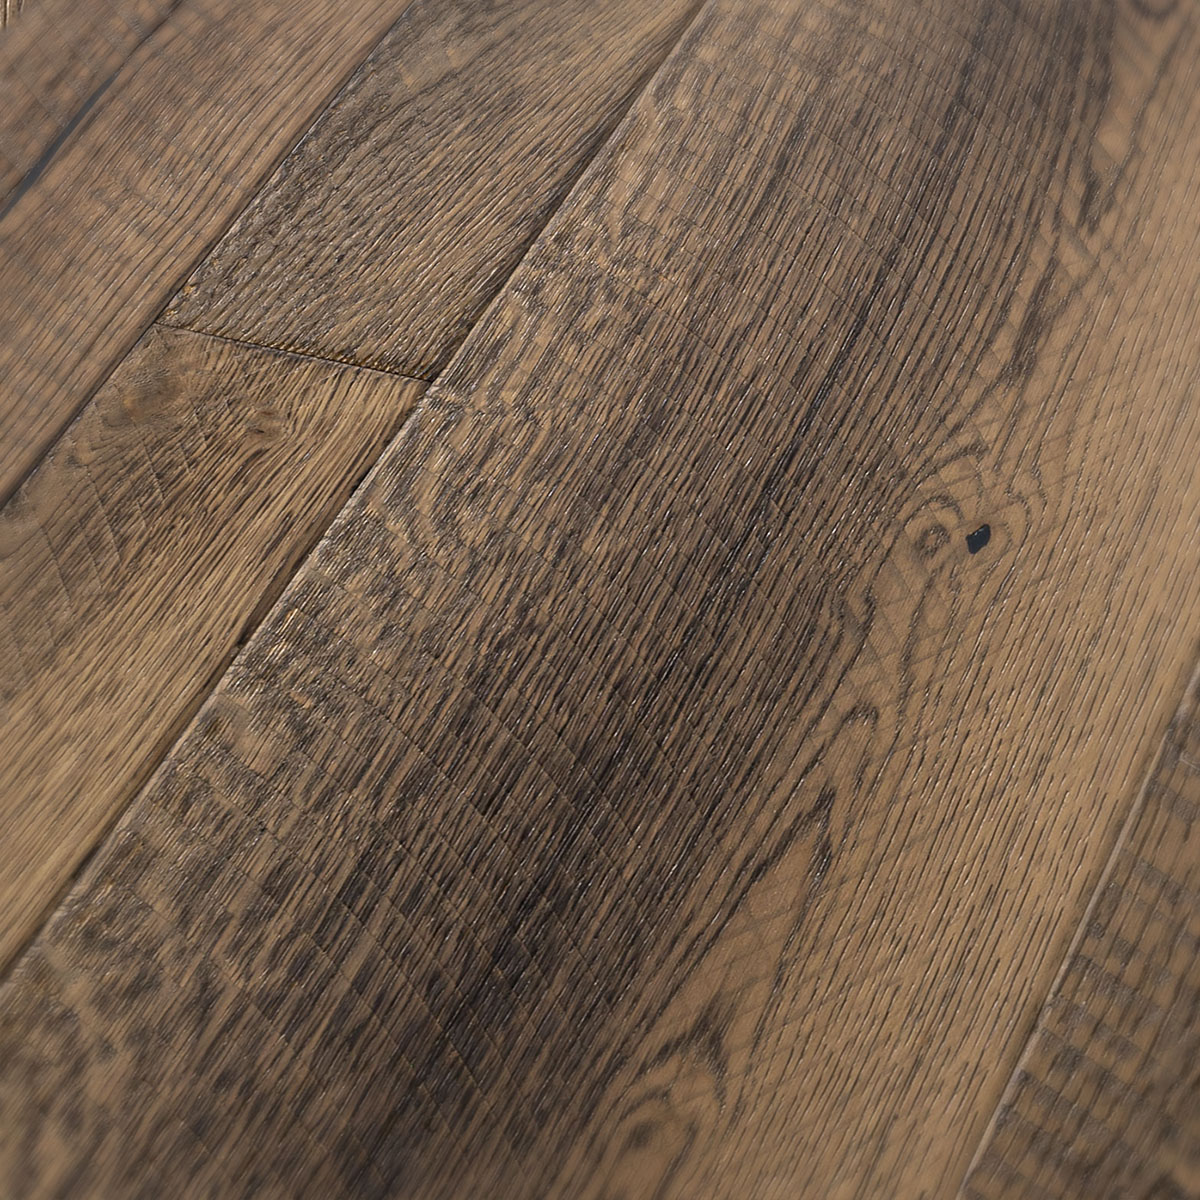 Park Hill - Brushed, Distressed Mixed Width Oak Floor